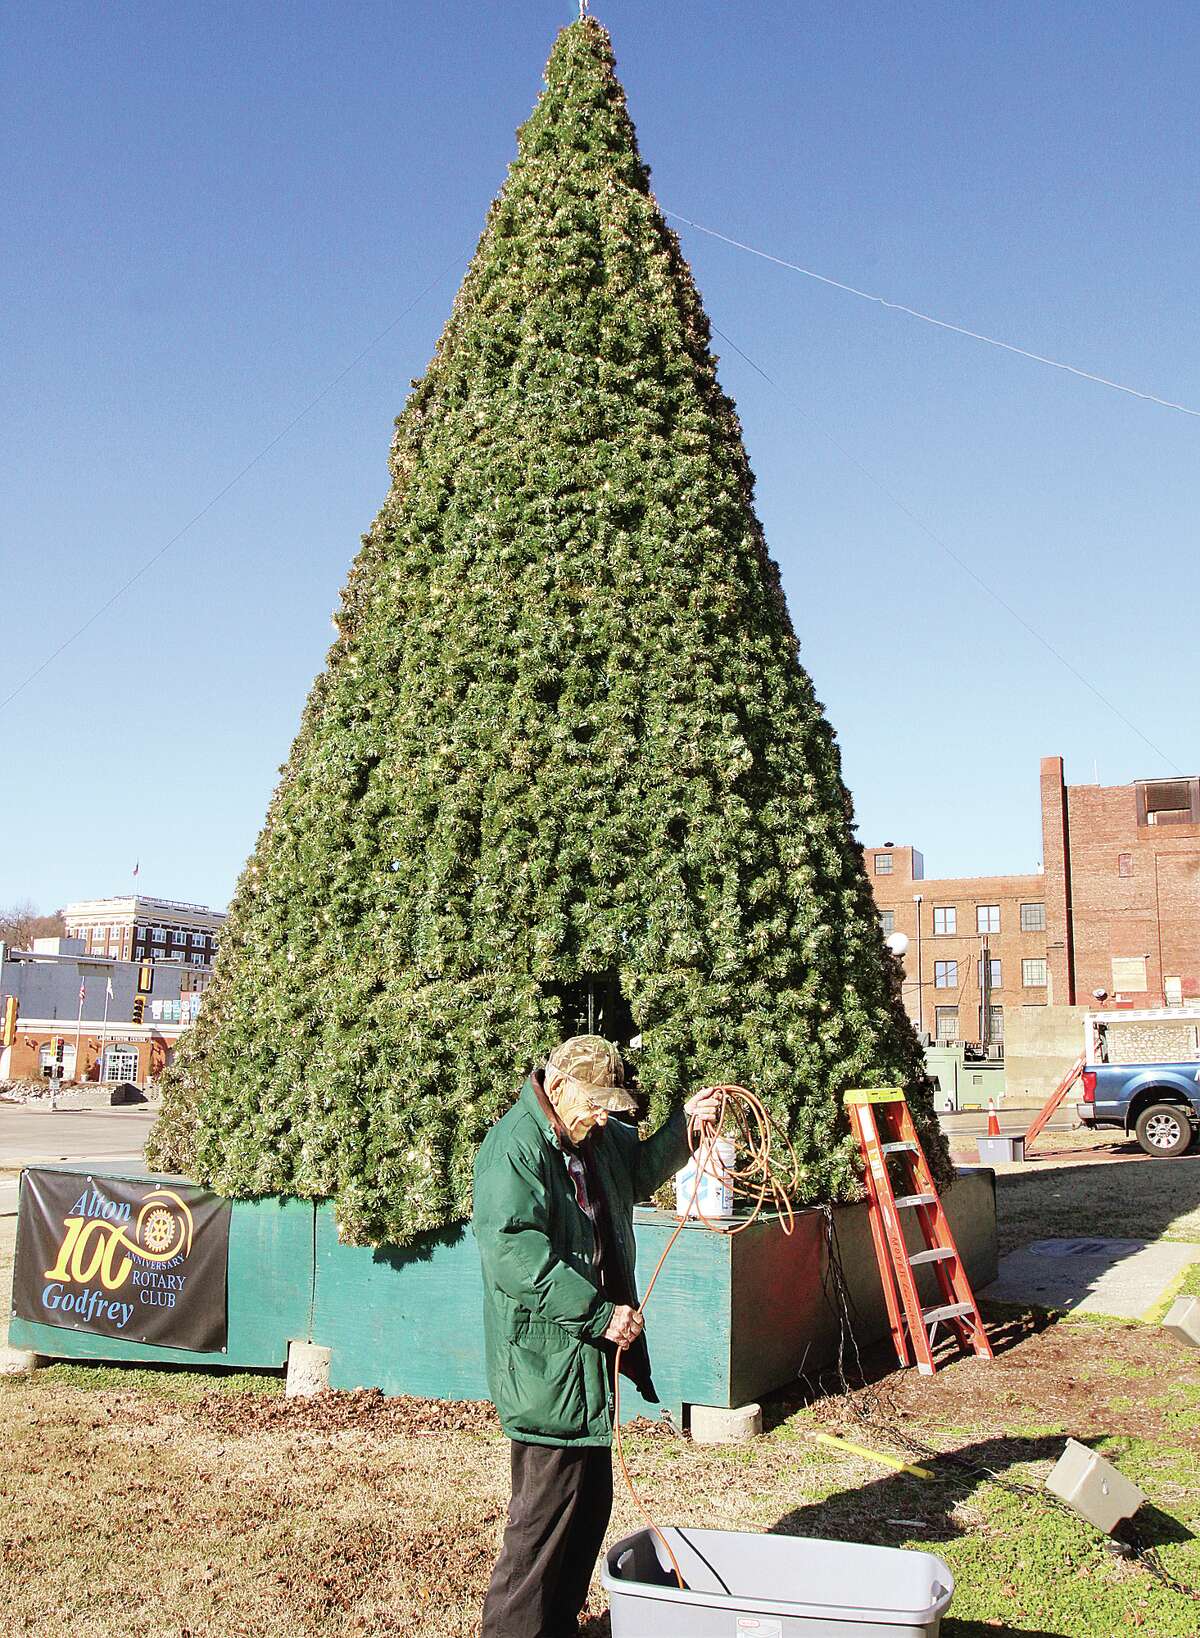 John Badman|The Telegraph Members of the Alton-Godfrey Rotary Club did some pre-takedown work Thursday afternoon at the Christmas tree they erect each year in Lincoln-Douglas Square. The men were removing and storing away all of the extension cords used to power the lights on the tree. Actual work to take down the tree, which is more than a quarter of a century old, will be done on a future weekend -- but not this one due to the forecast for snow.